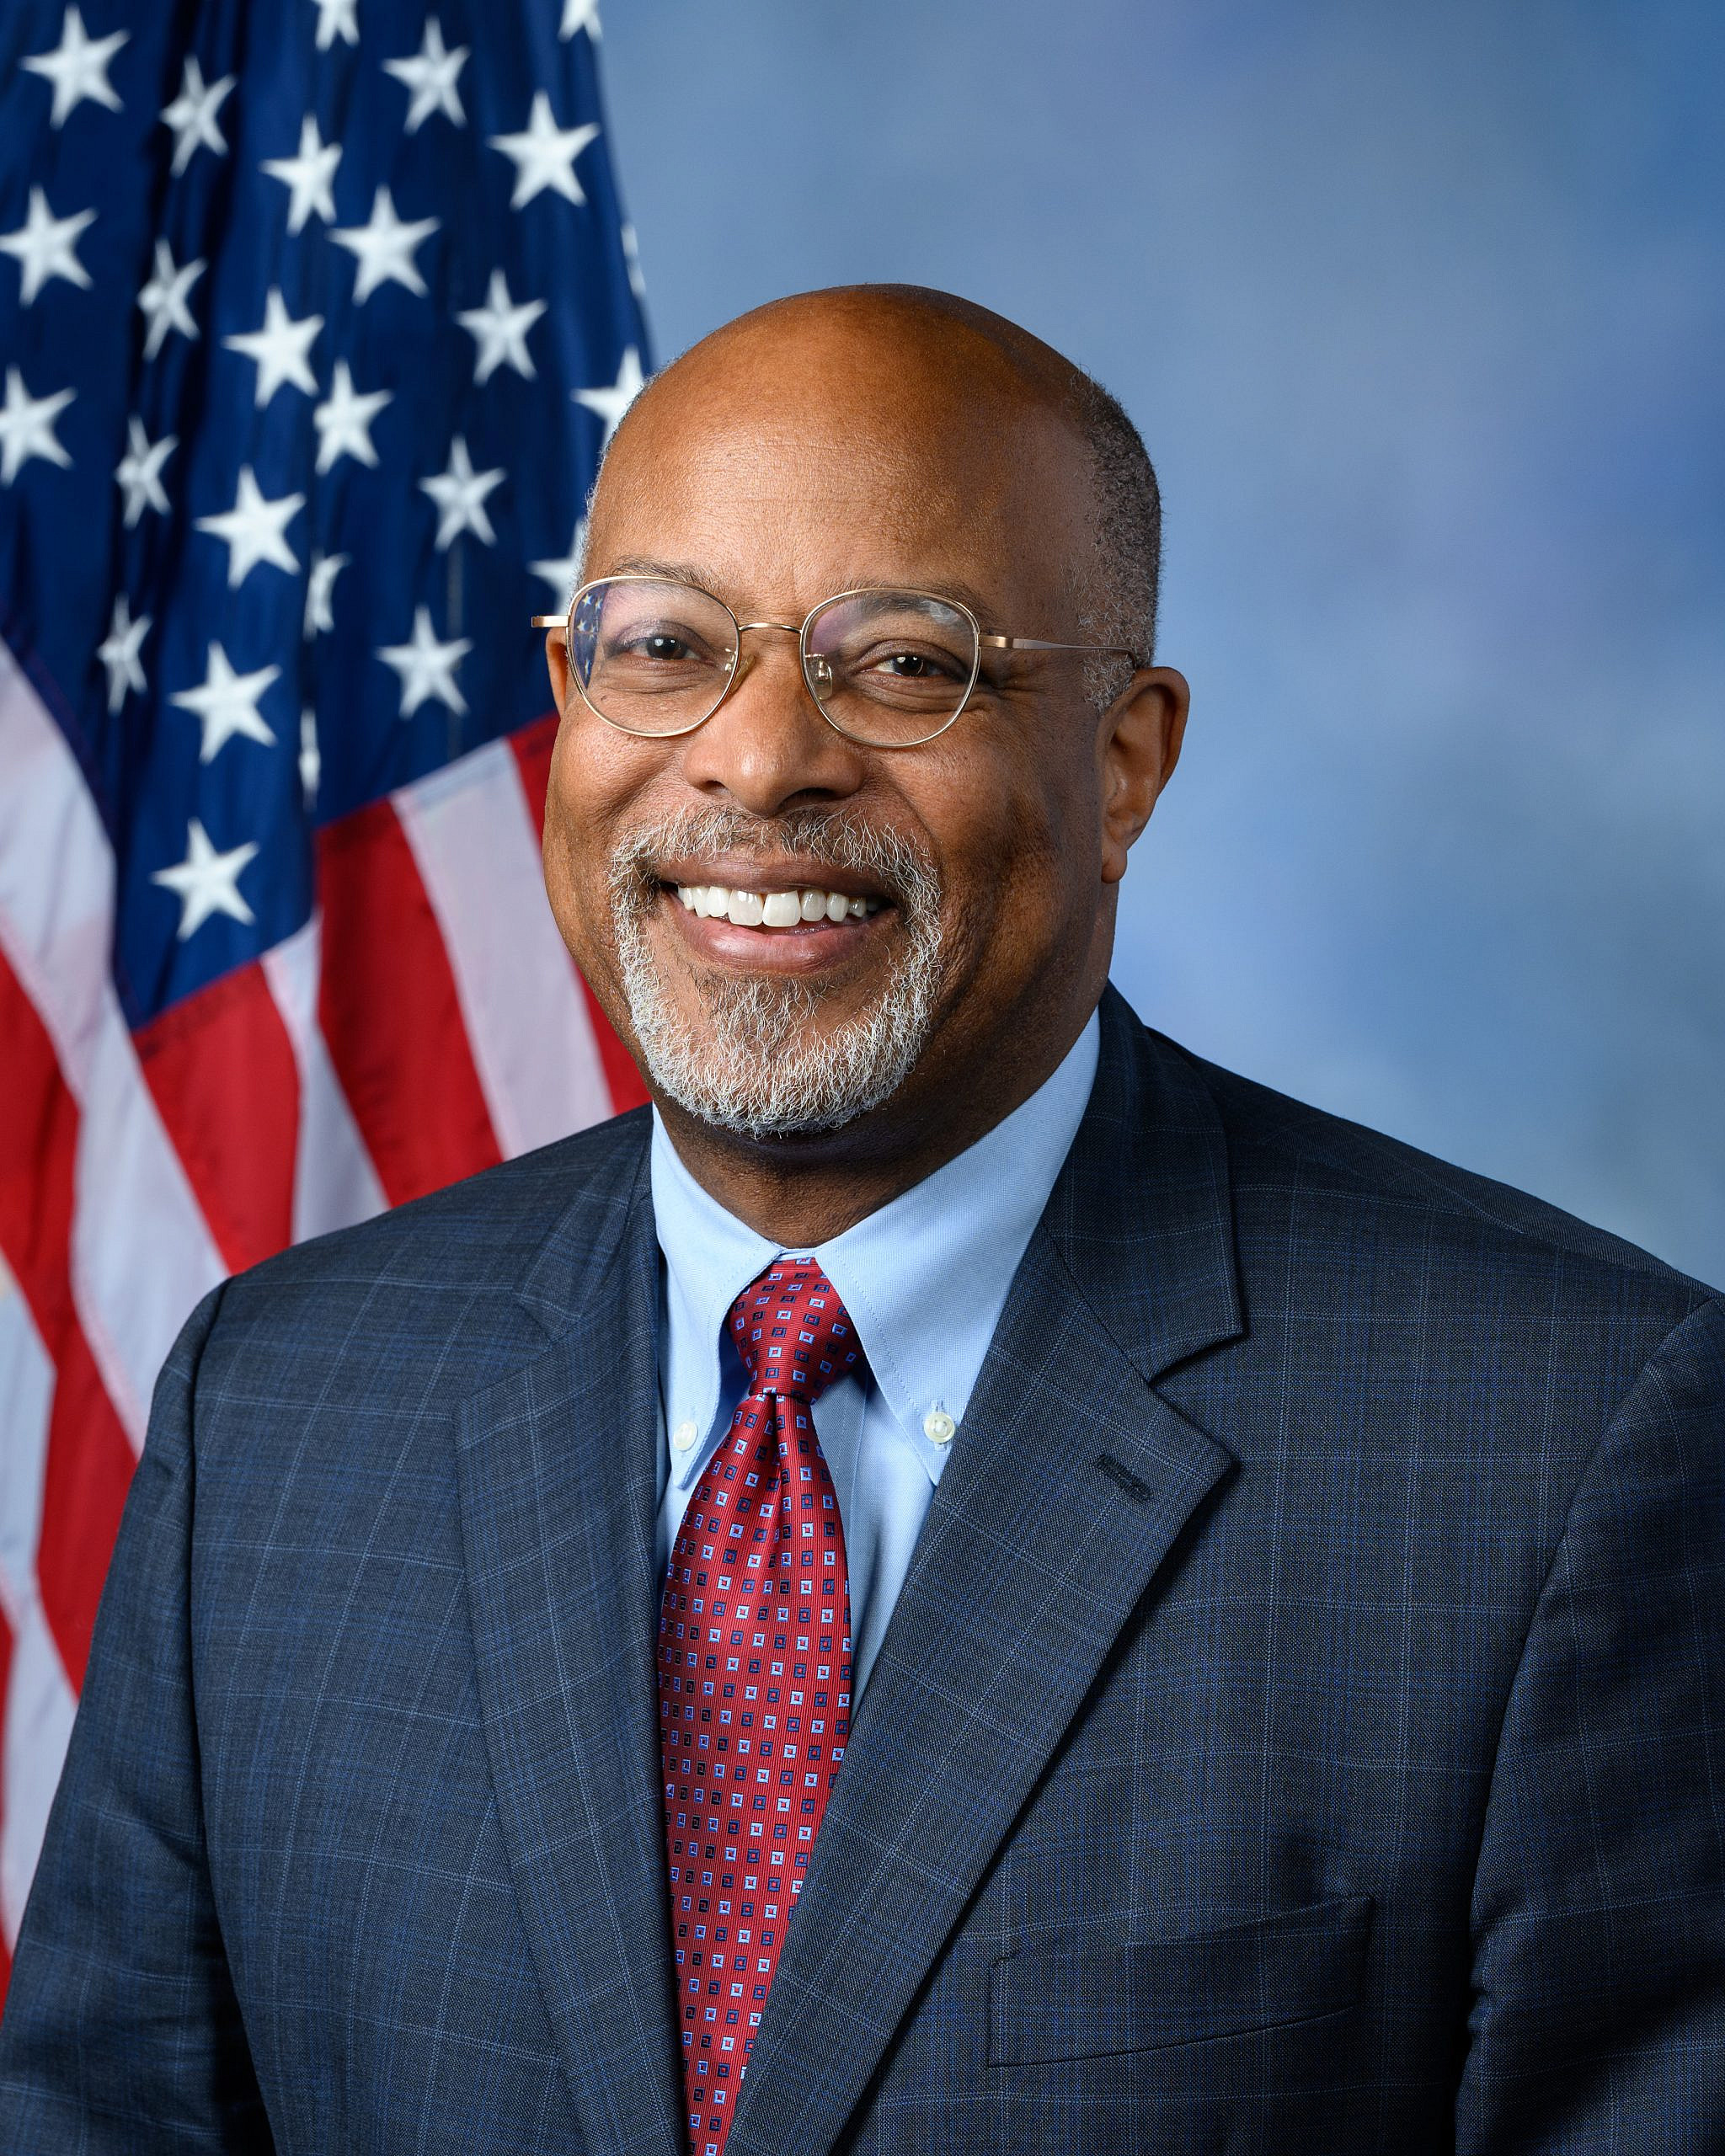 Rep. Glenn Ivey (D-Md.). Credit: U.S. House of Representatives Official Photo via Wikimedia Commons.